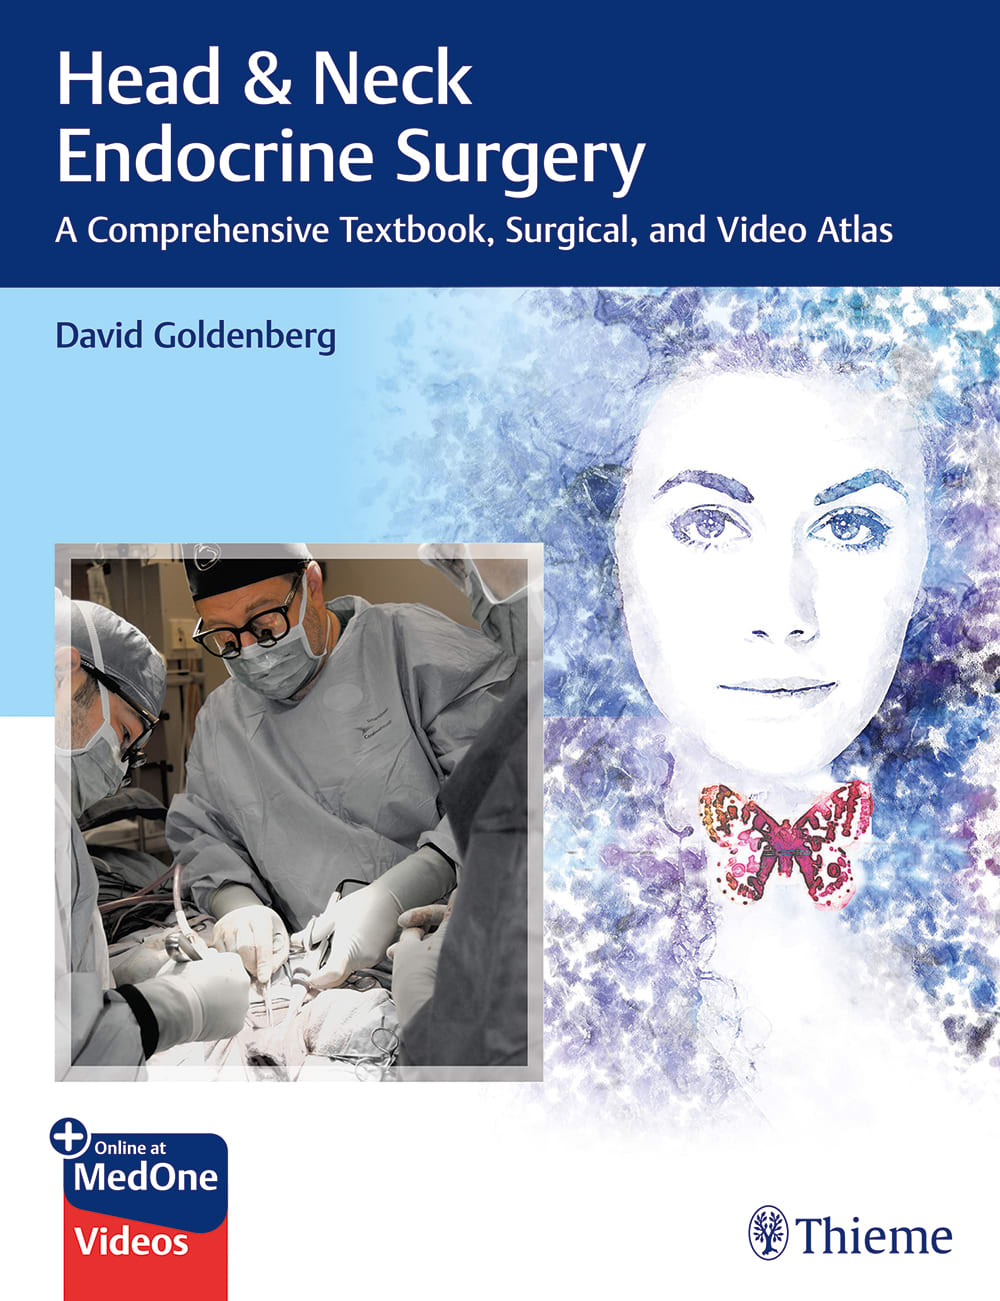 head & neck endocrine surgery a comprehensive textbook, surgical, and video atlas 1st edition david